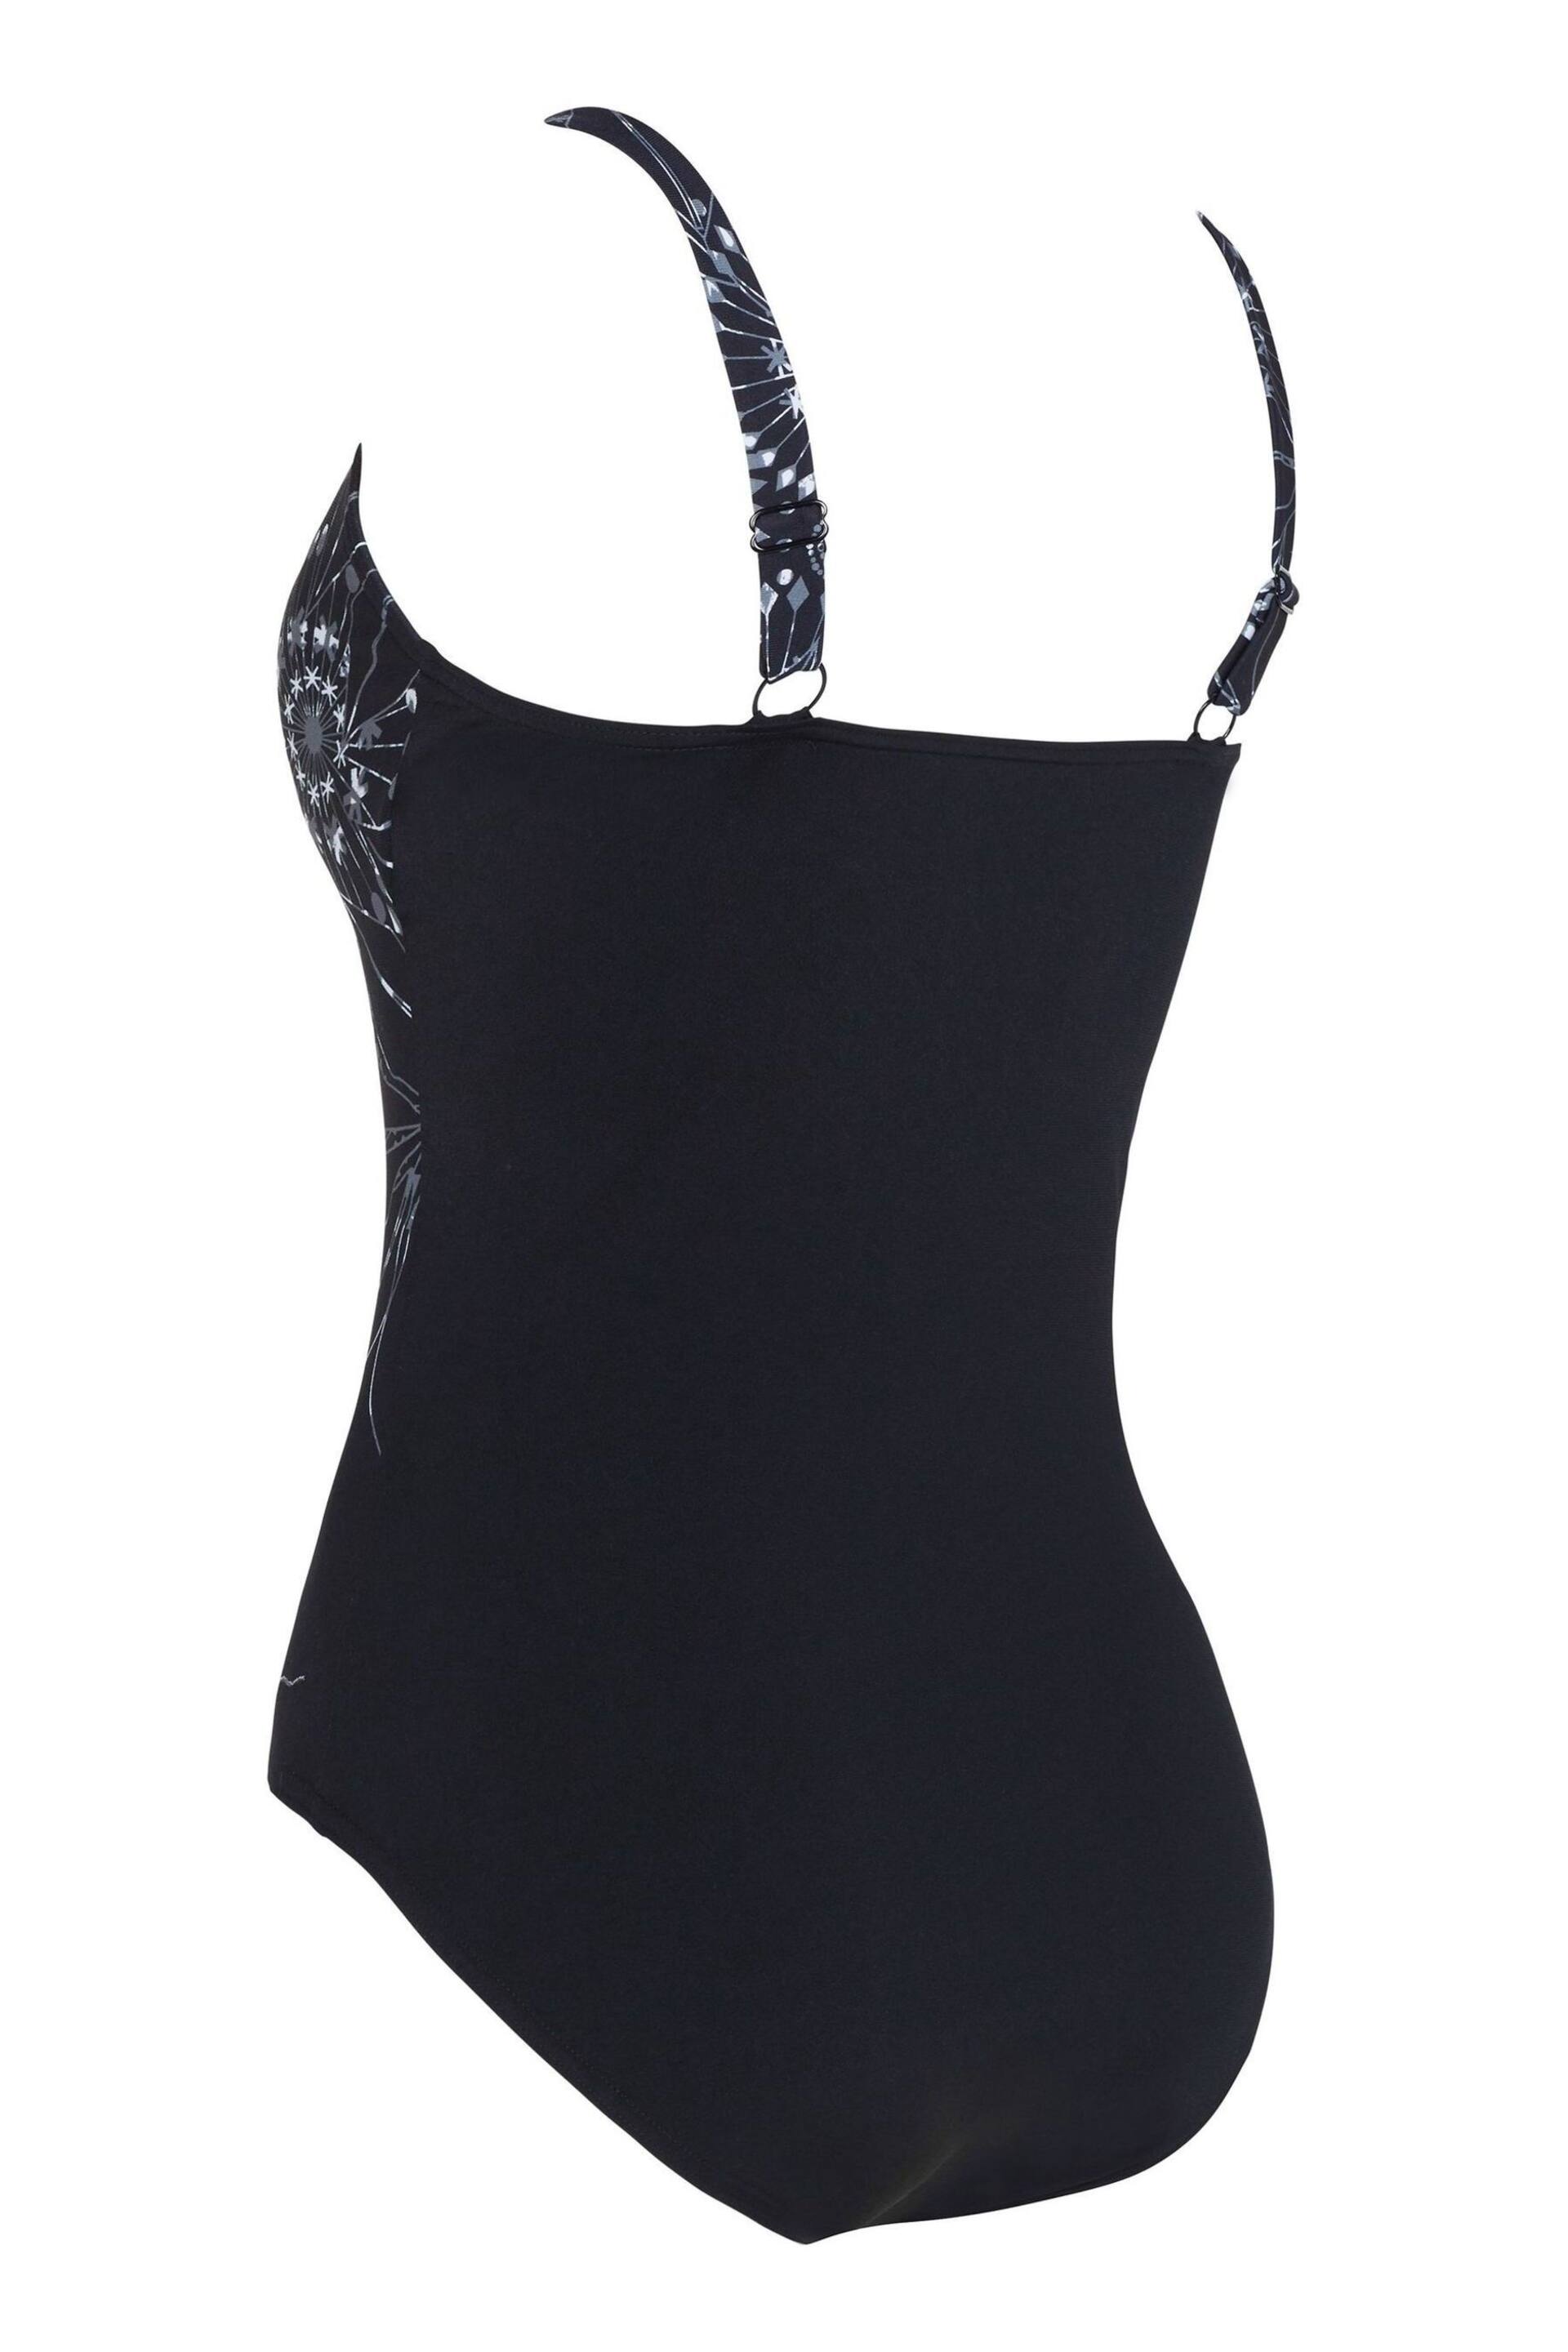 Zoggs Adjustable Classicback One Piece Swimsuit with Foam Cup Support - Image 8 of 8